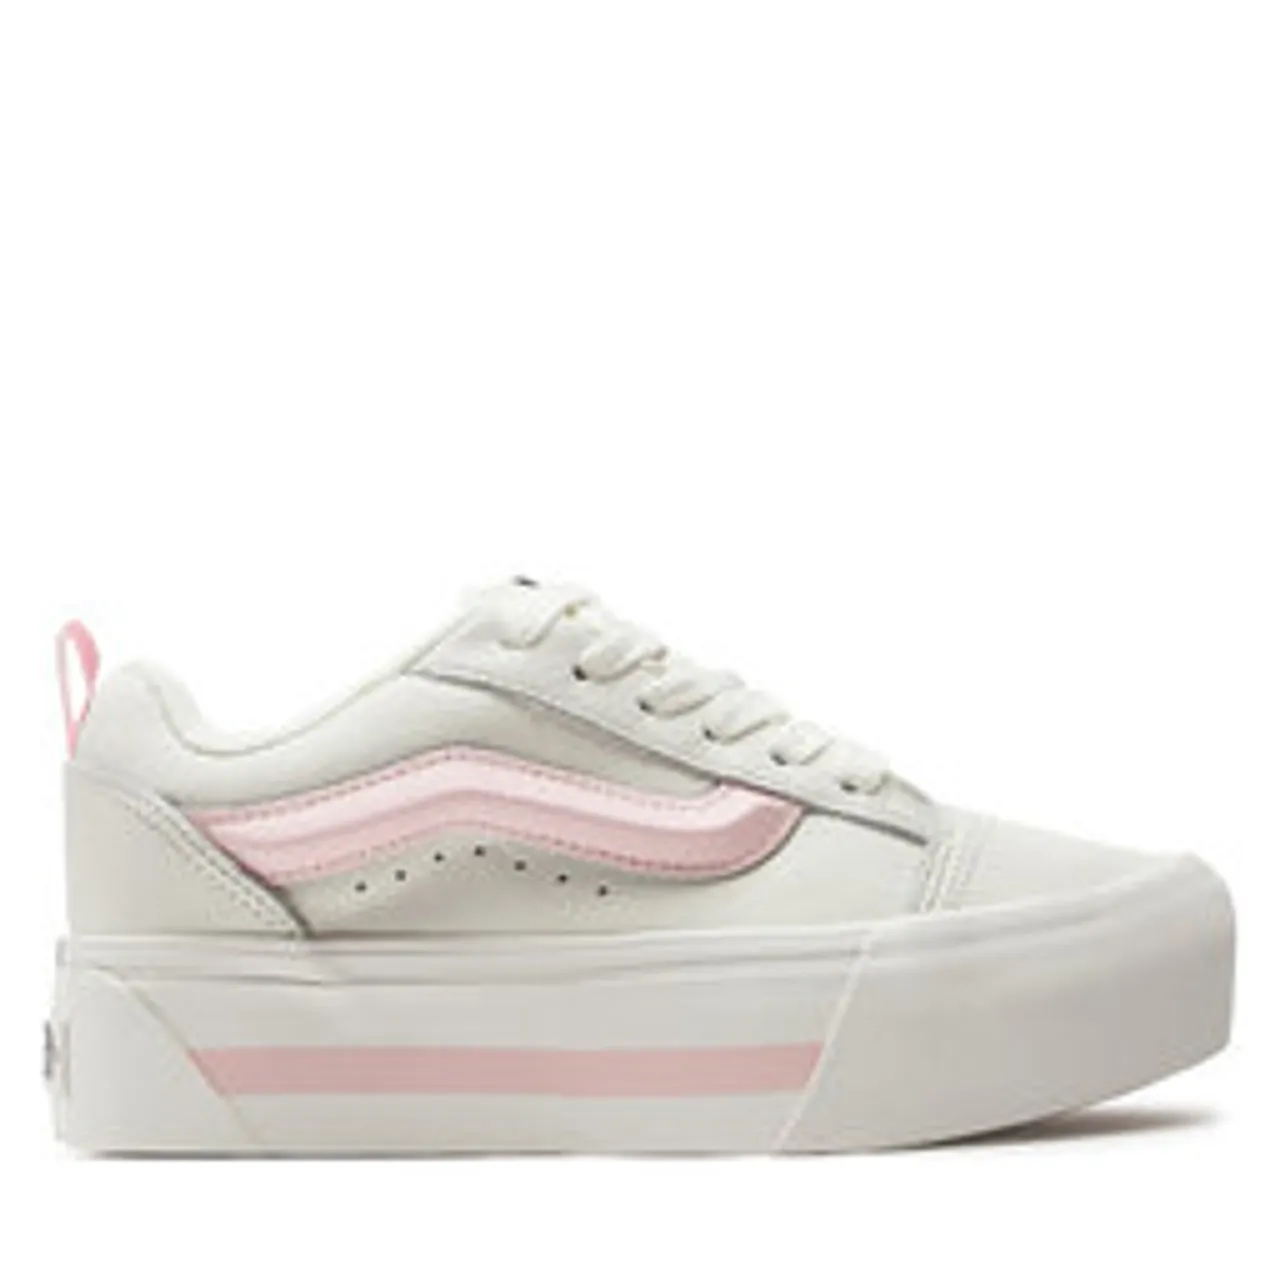 Sneakers aus Stoff Vans Knu Stack VN000CP6YL71 White/Pink